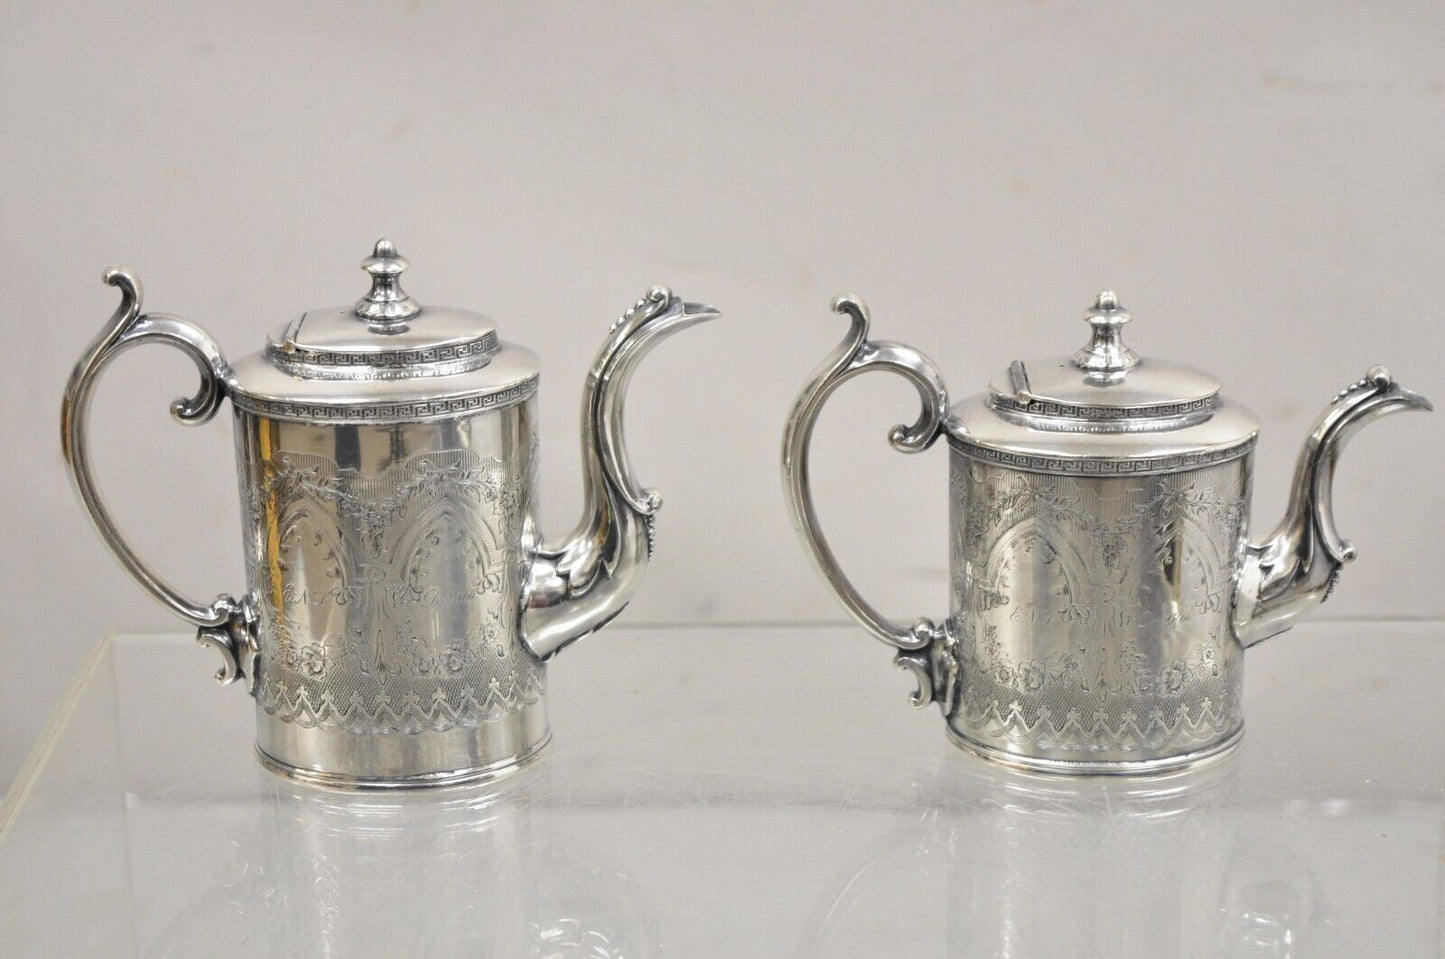 Vintage J.F. Curran & Co Victorian Silver Plated Small Coffee Tea Set - 4 Pc Set